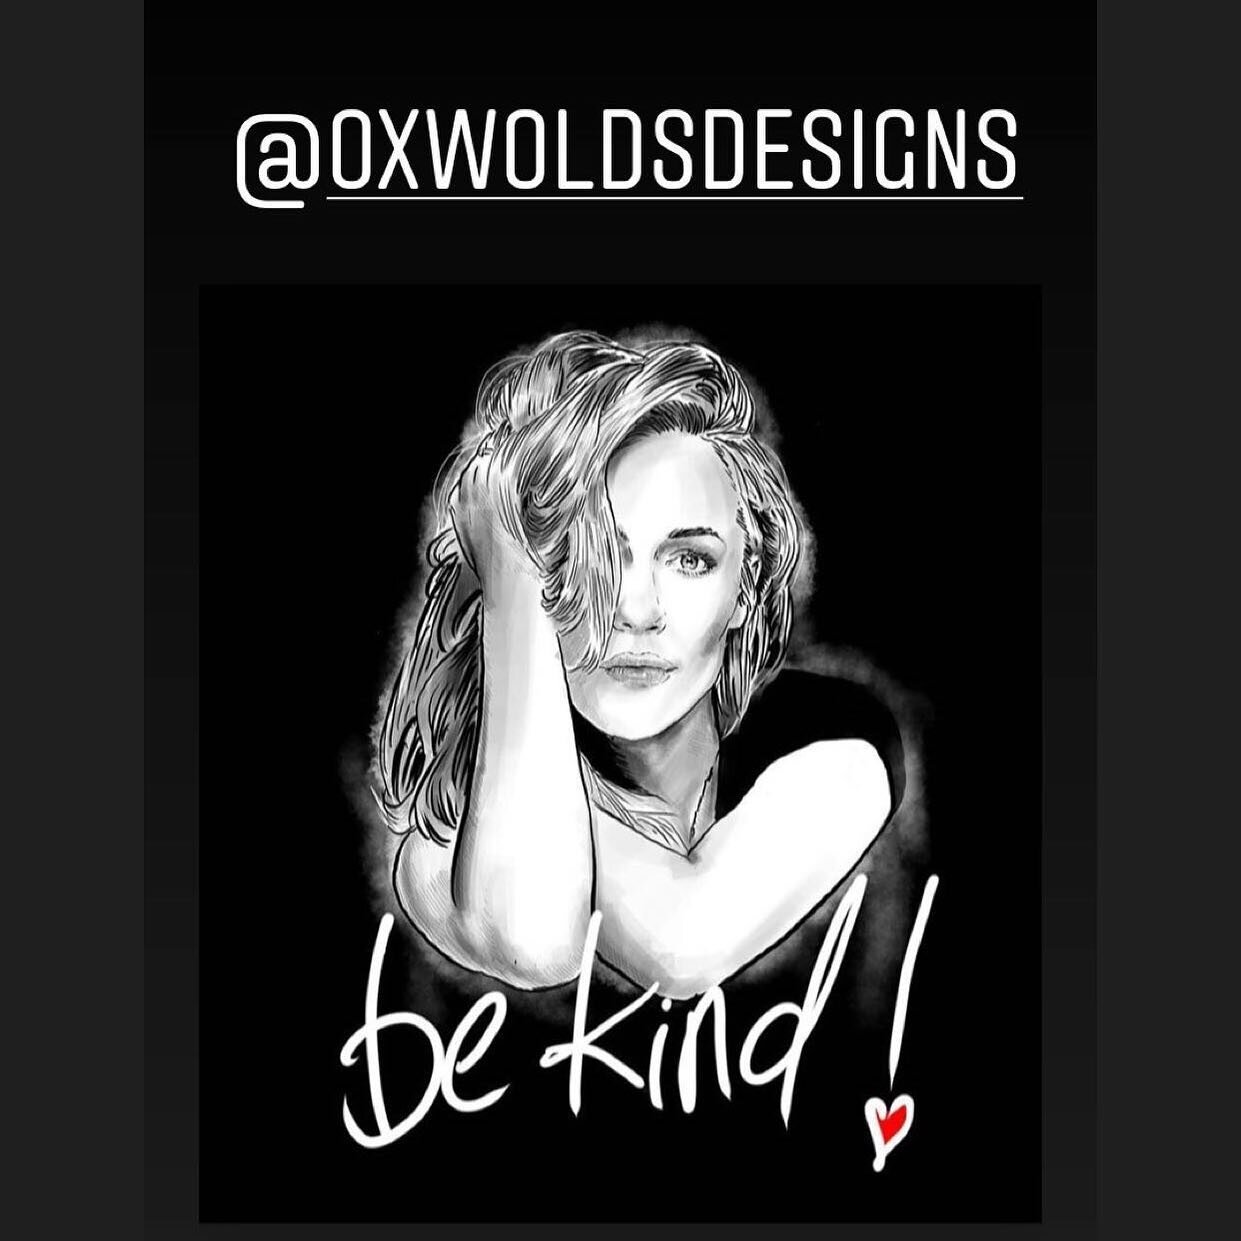 The smallest act of &ldquo;Kindness&rdquo; is worth more than the greatest intention..........❤️ #bekind #listen #support #understand #justbethere #love #talk #cry #love #lovelife #bekindtoyourself #bekindtoothers #kindness @mr_oxd